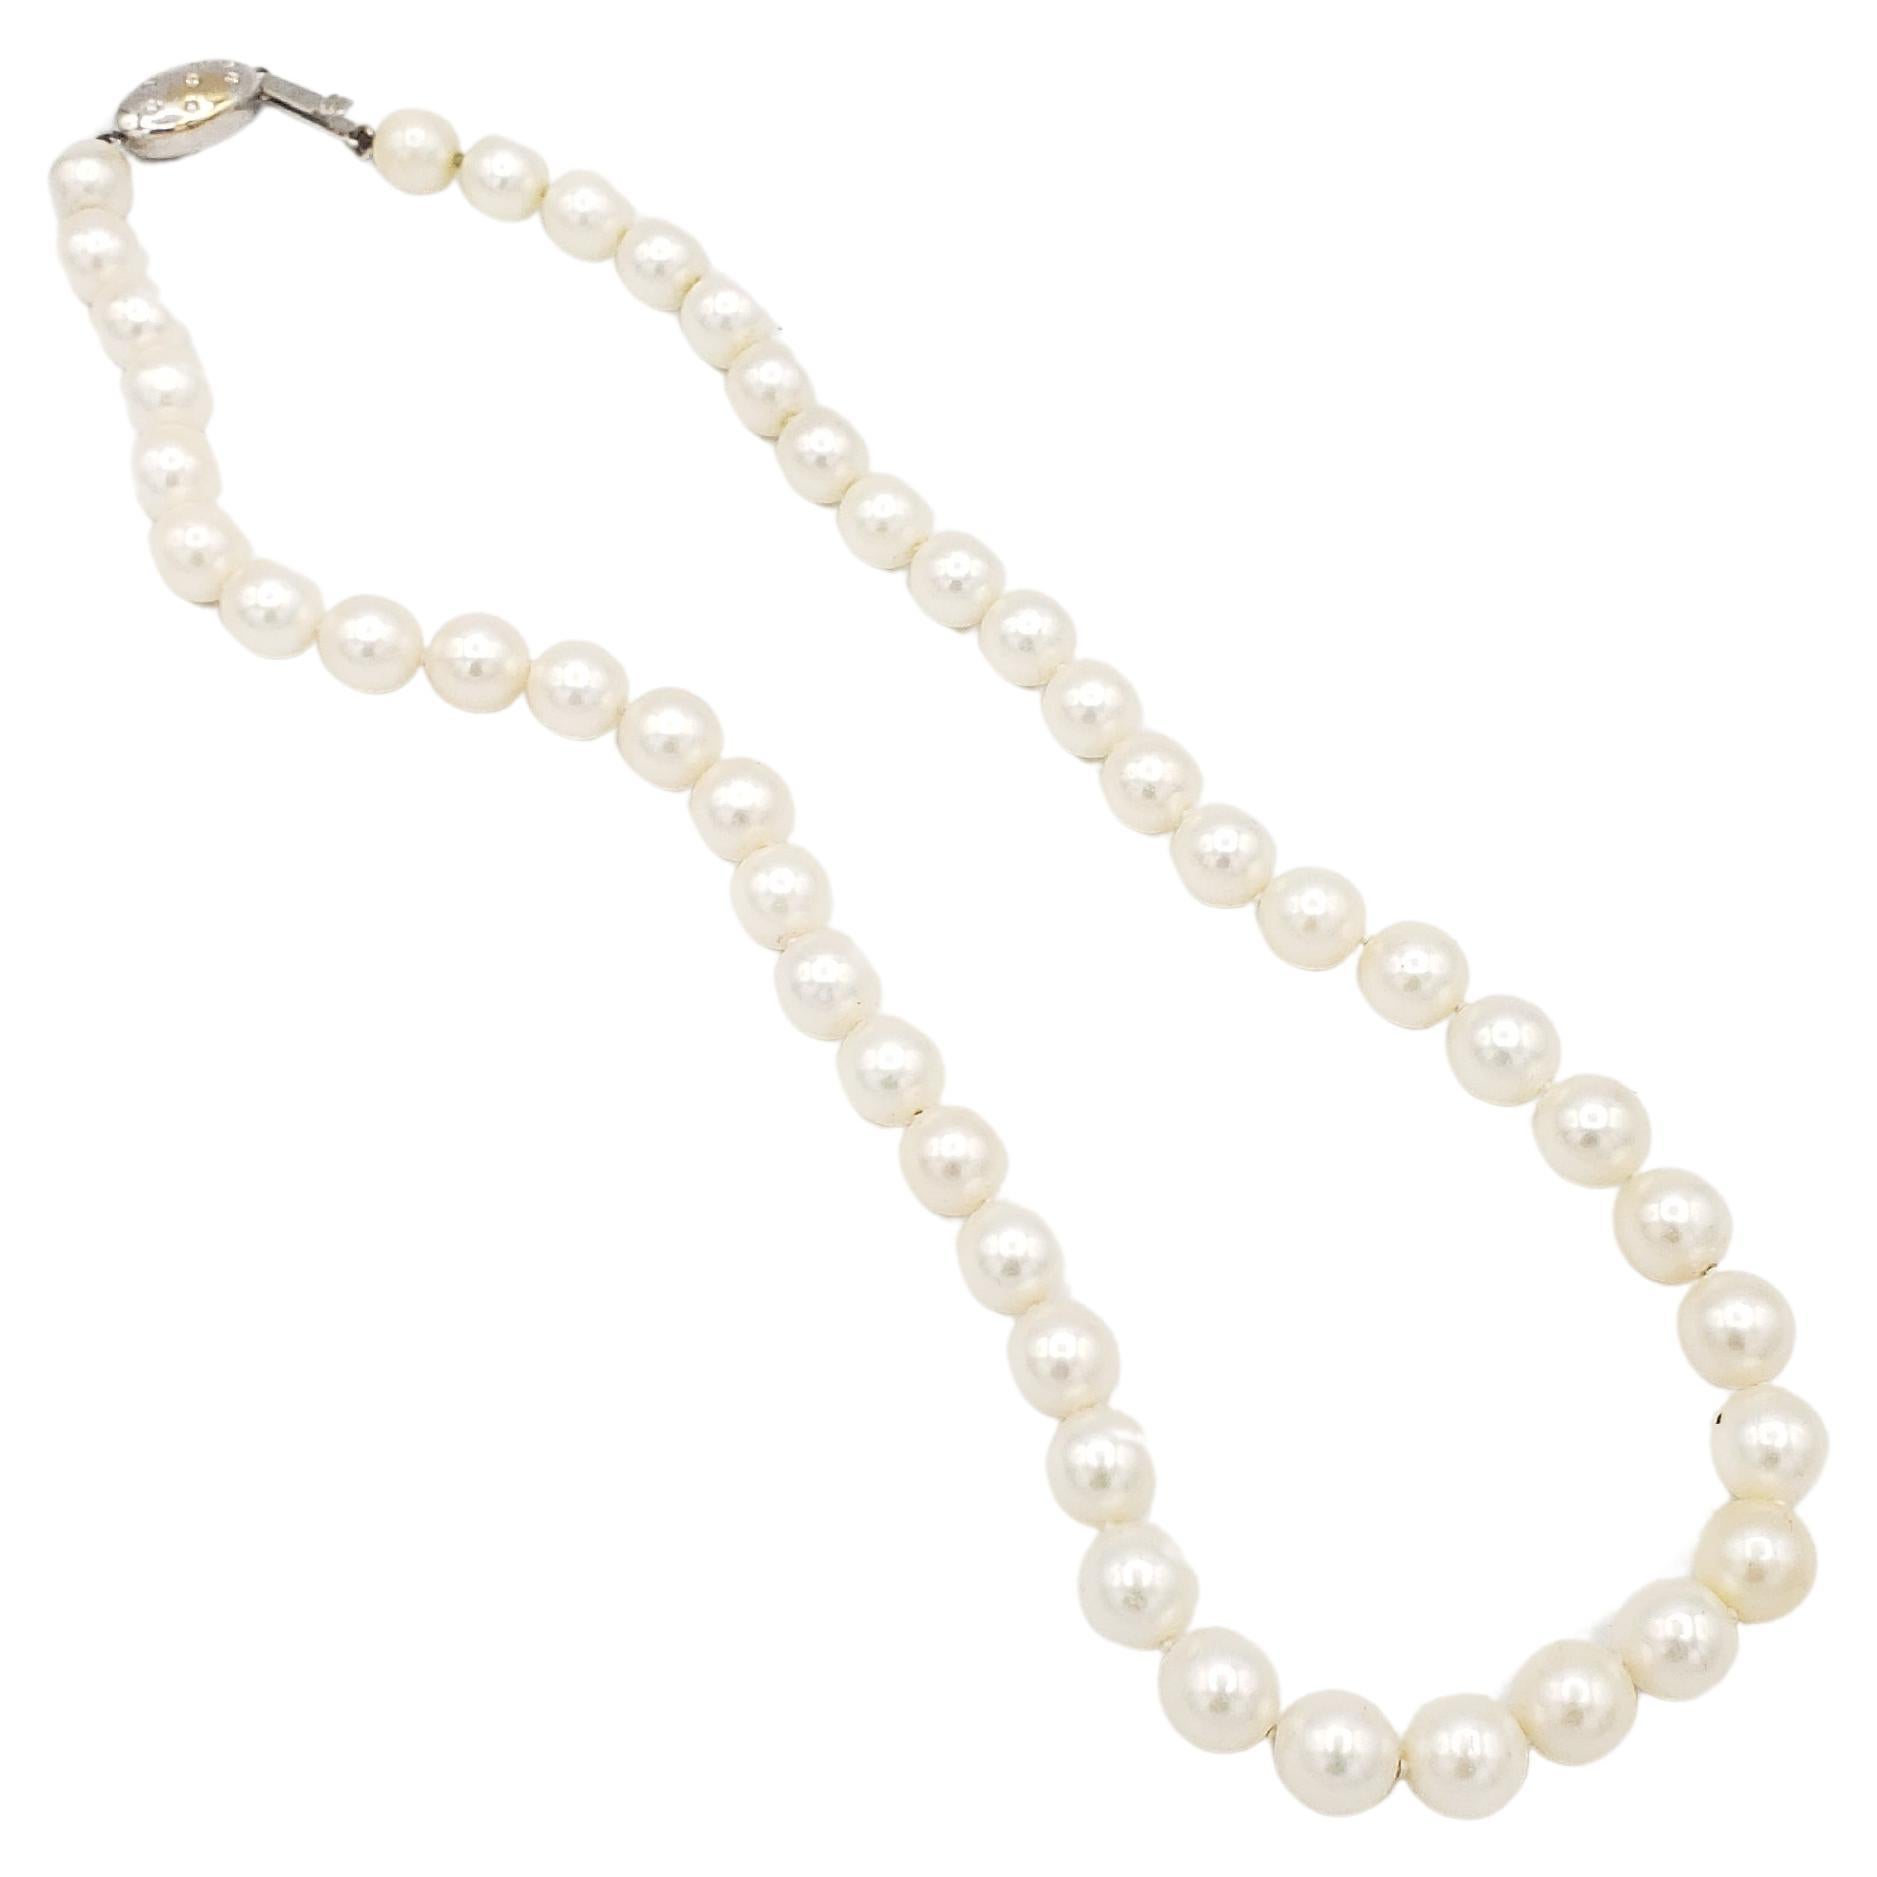 NEW AAA+ Quality Japanese Akoya Salt Water White Pearl Necklace For Sale